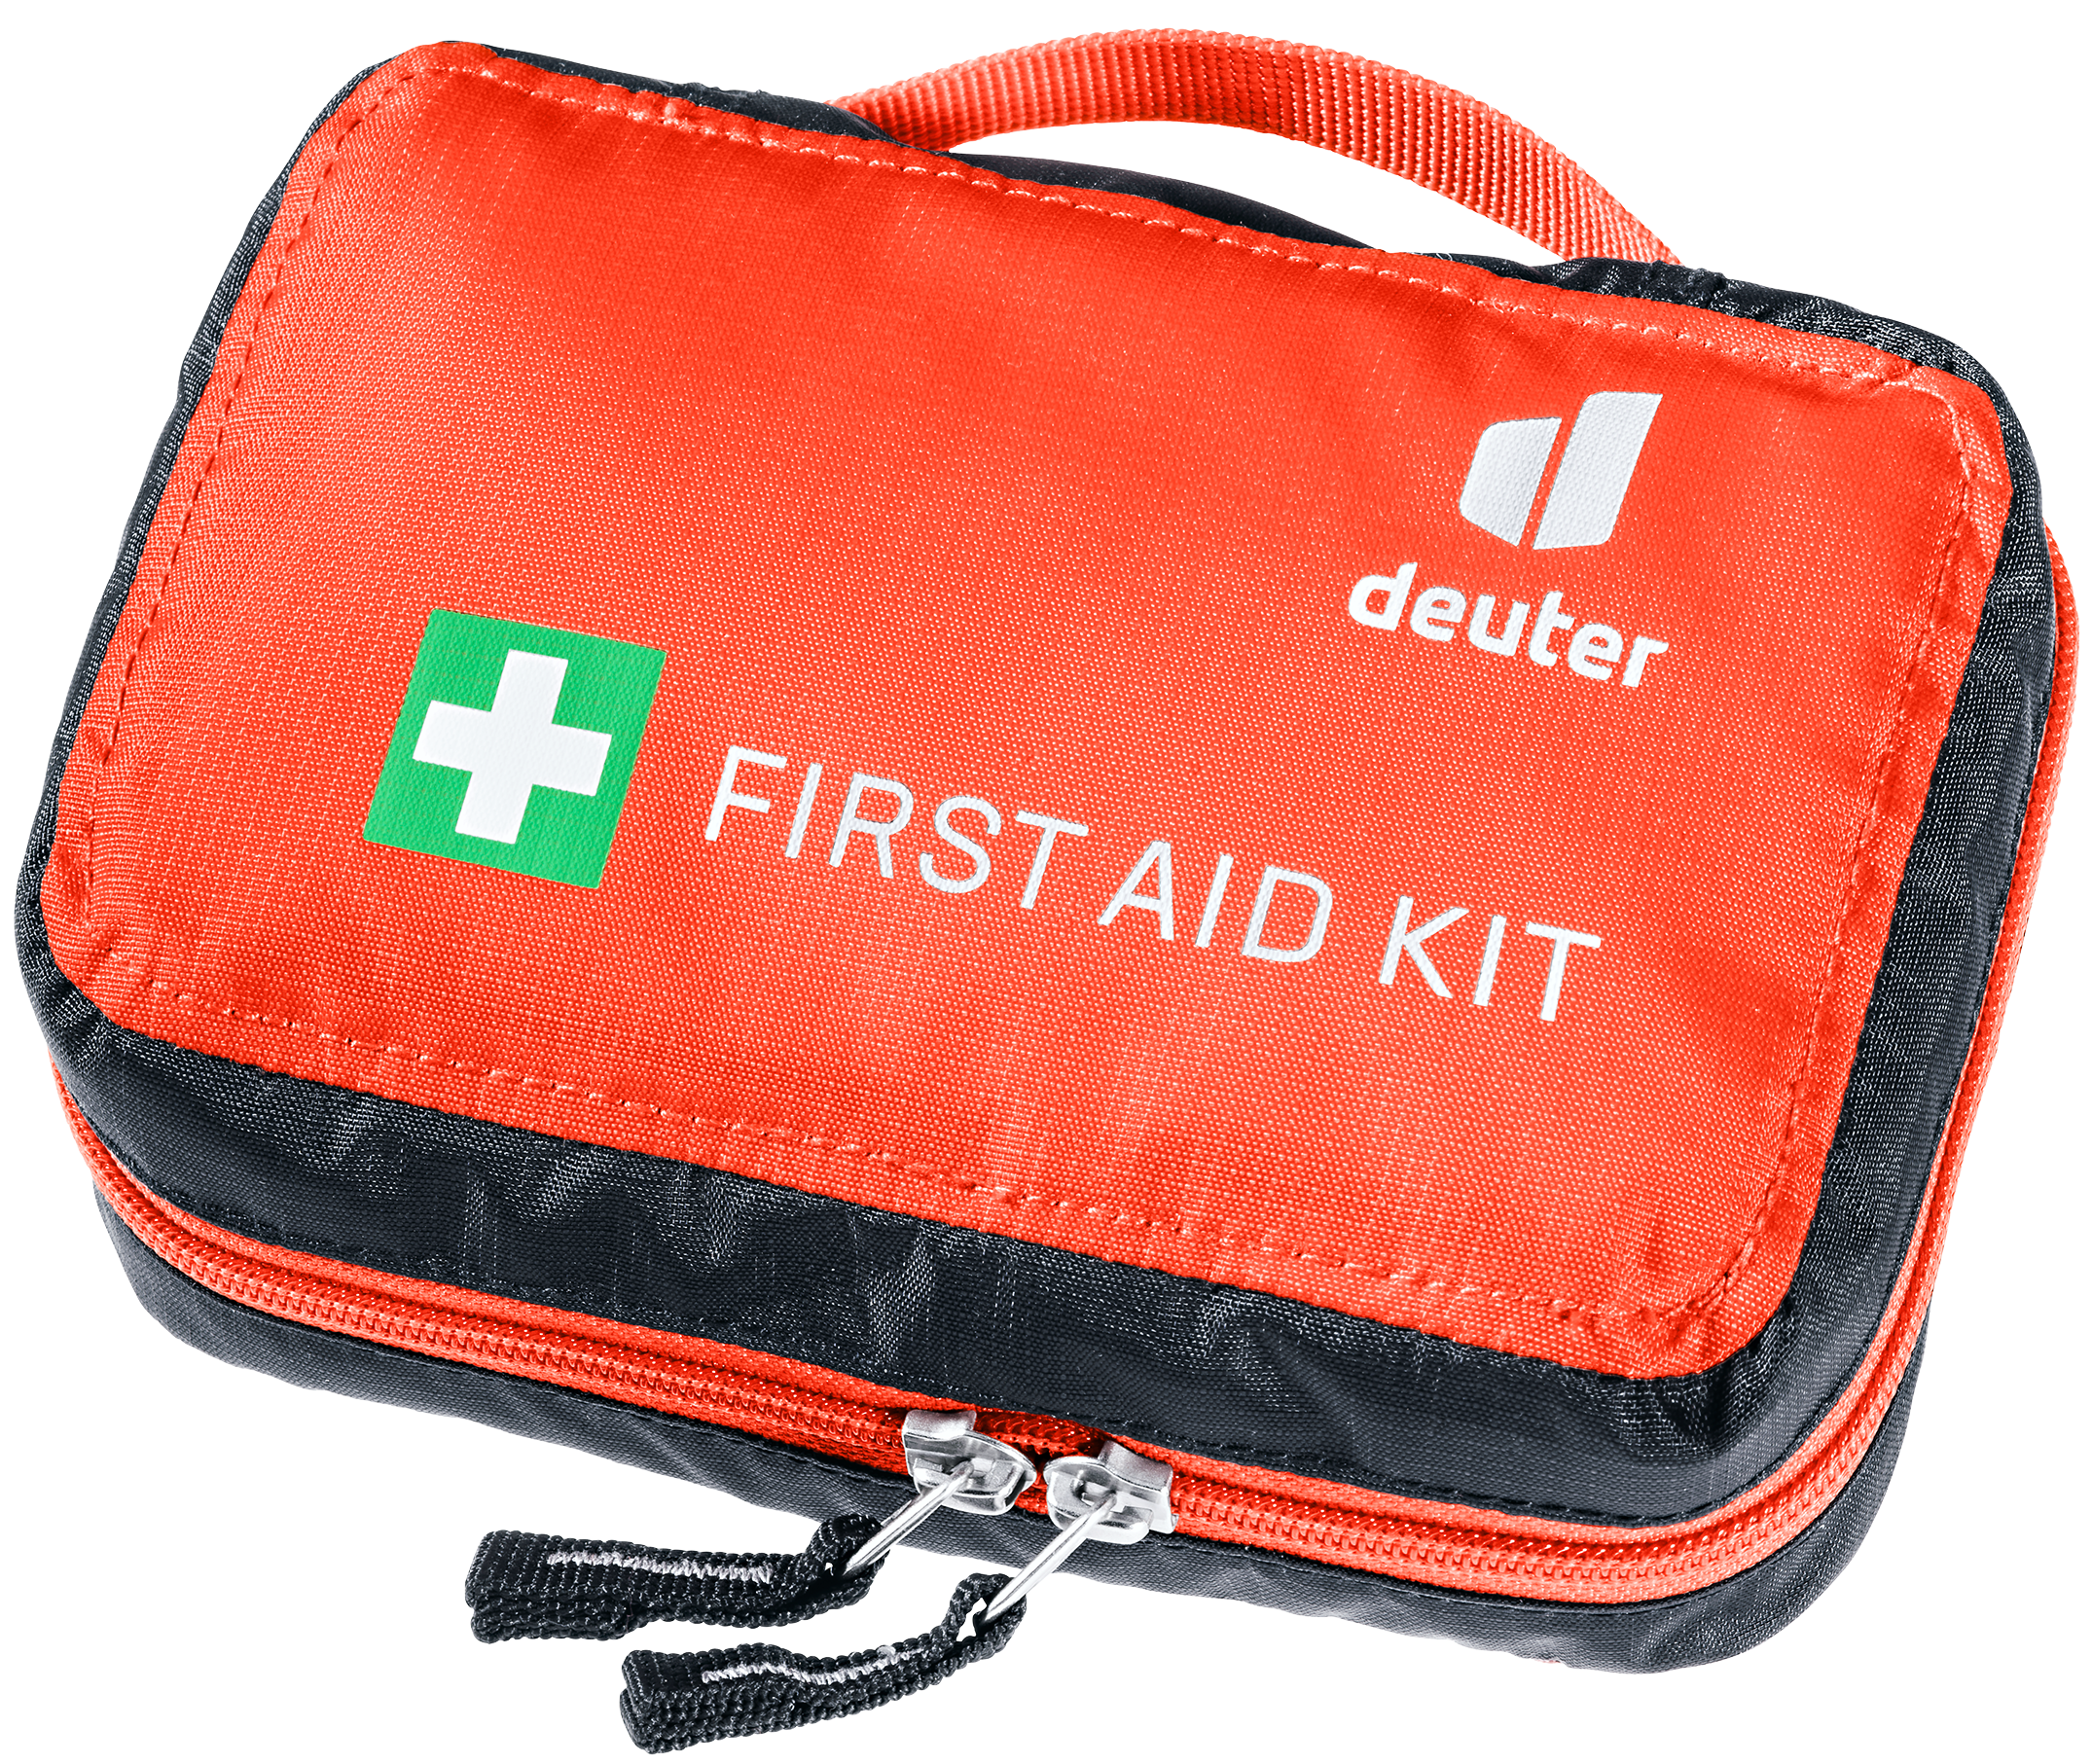 https://dk0fkjygbn9vu.cloudfront.net/cache-buster-11708470494/deuter/mediaroom/product-images/accessories/first-aid-kits/140332/image-thumb__140332__deuter_lightbox-img/3970123-9002-FirstAidKit_papaya-D-00.png